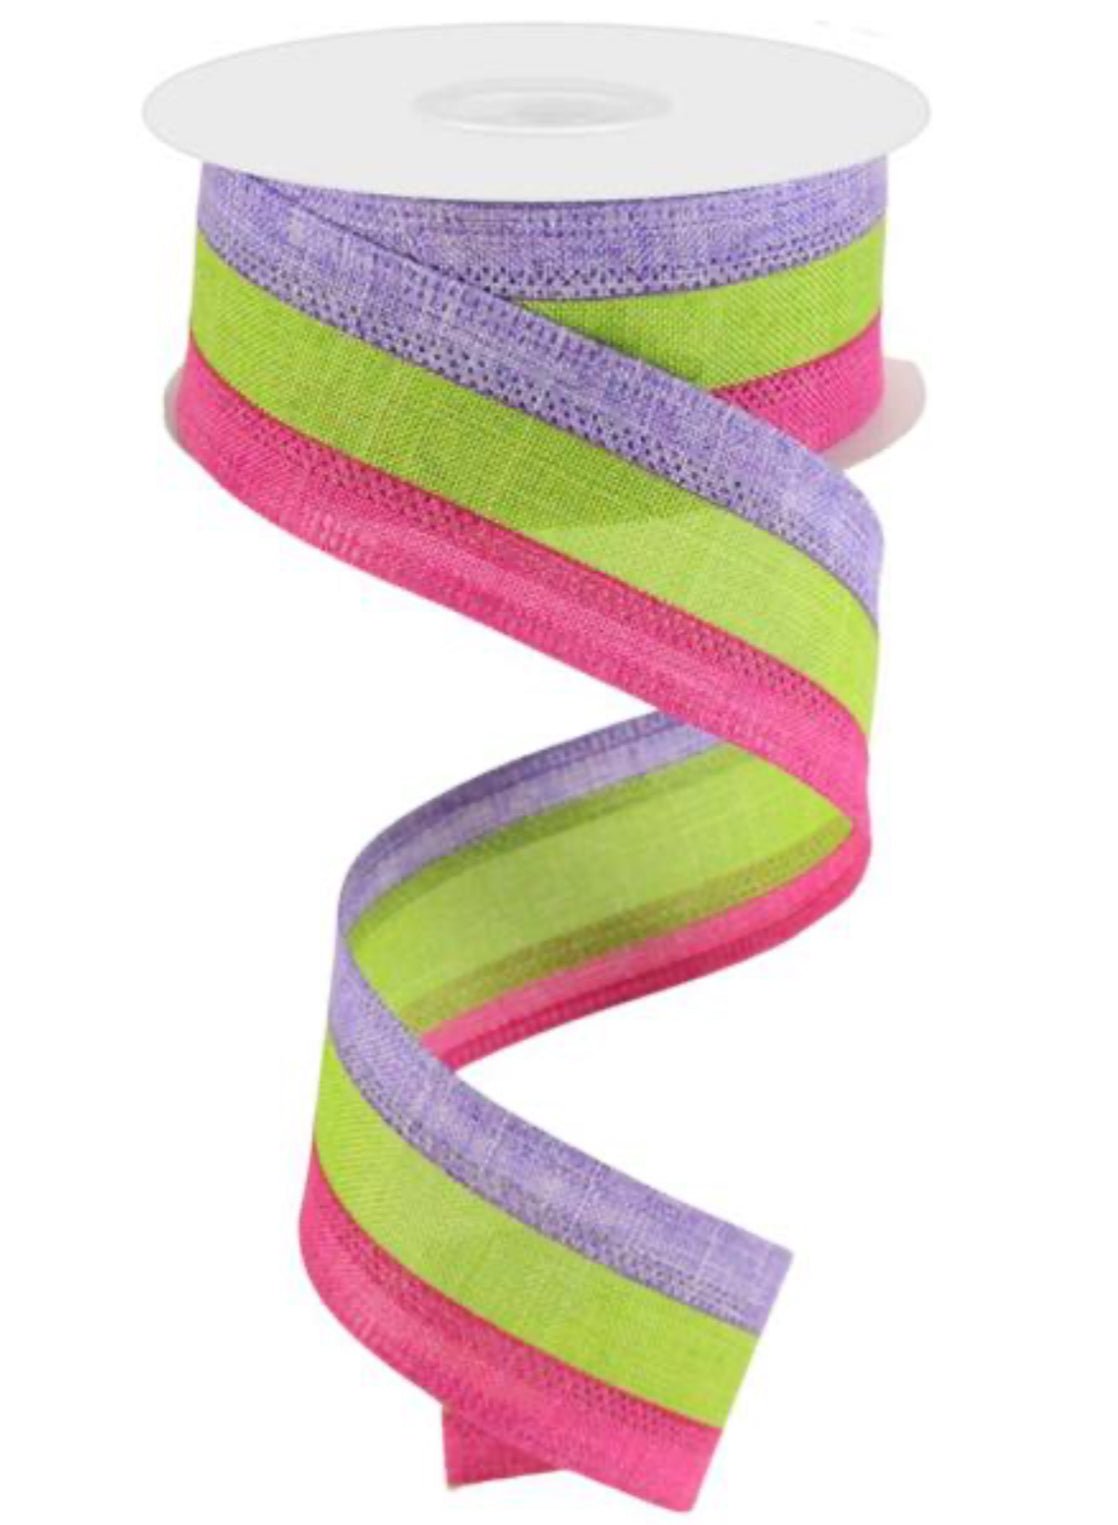 3 colors in 1 striped ribbon 1.5” - Greenery MarketWired ribbonRG0160149